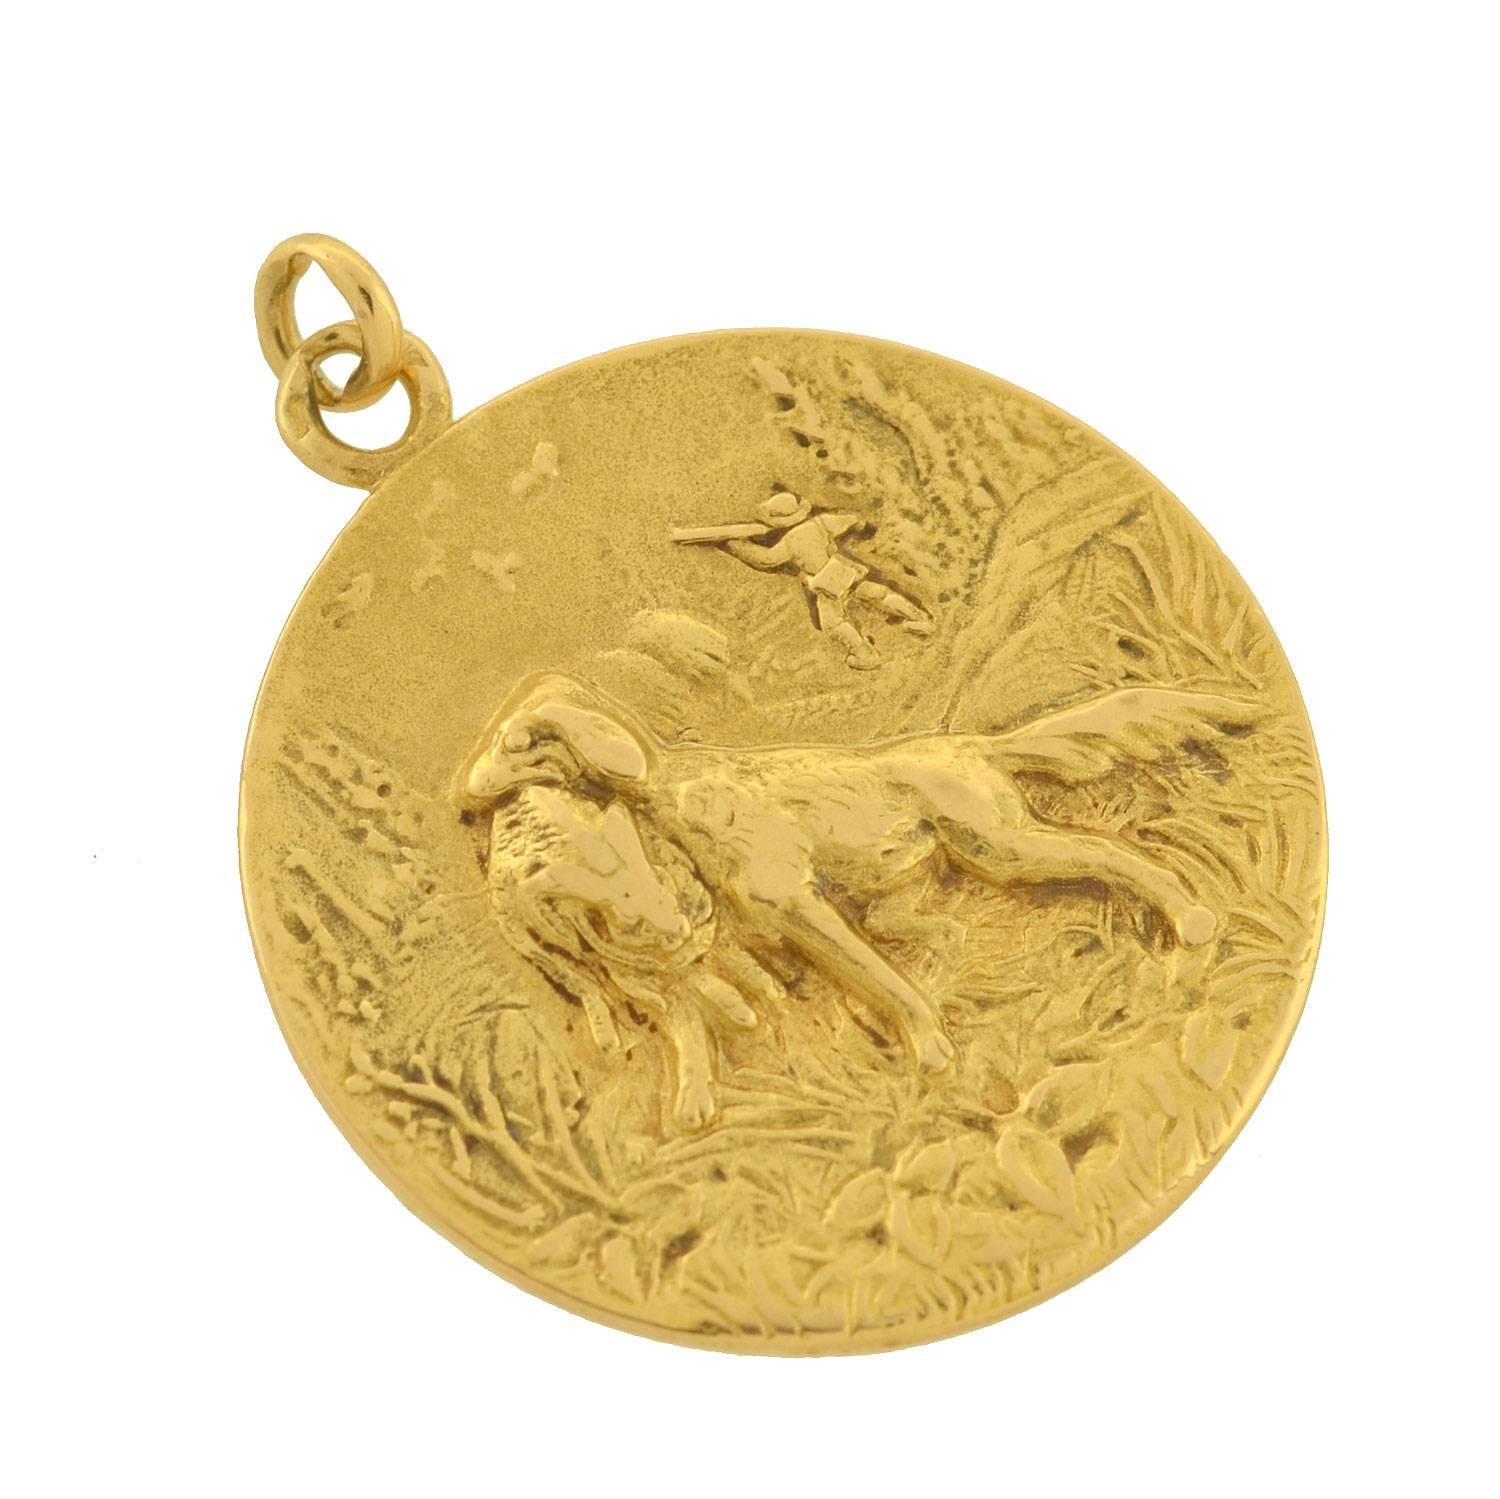 This lovely gold pendant from the Edwardian era (ca1910) is a signed piece by Cartier! Crafted in vibrant 18kt yellow gold, the pendant displays a hunting scene. The raised image is intricately detailed, depicting the grassy countryside with trees